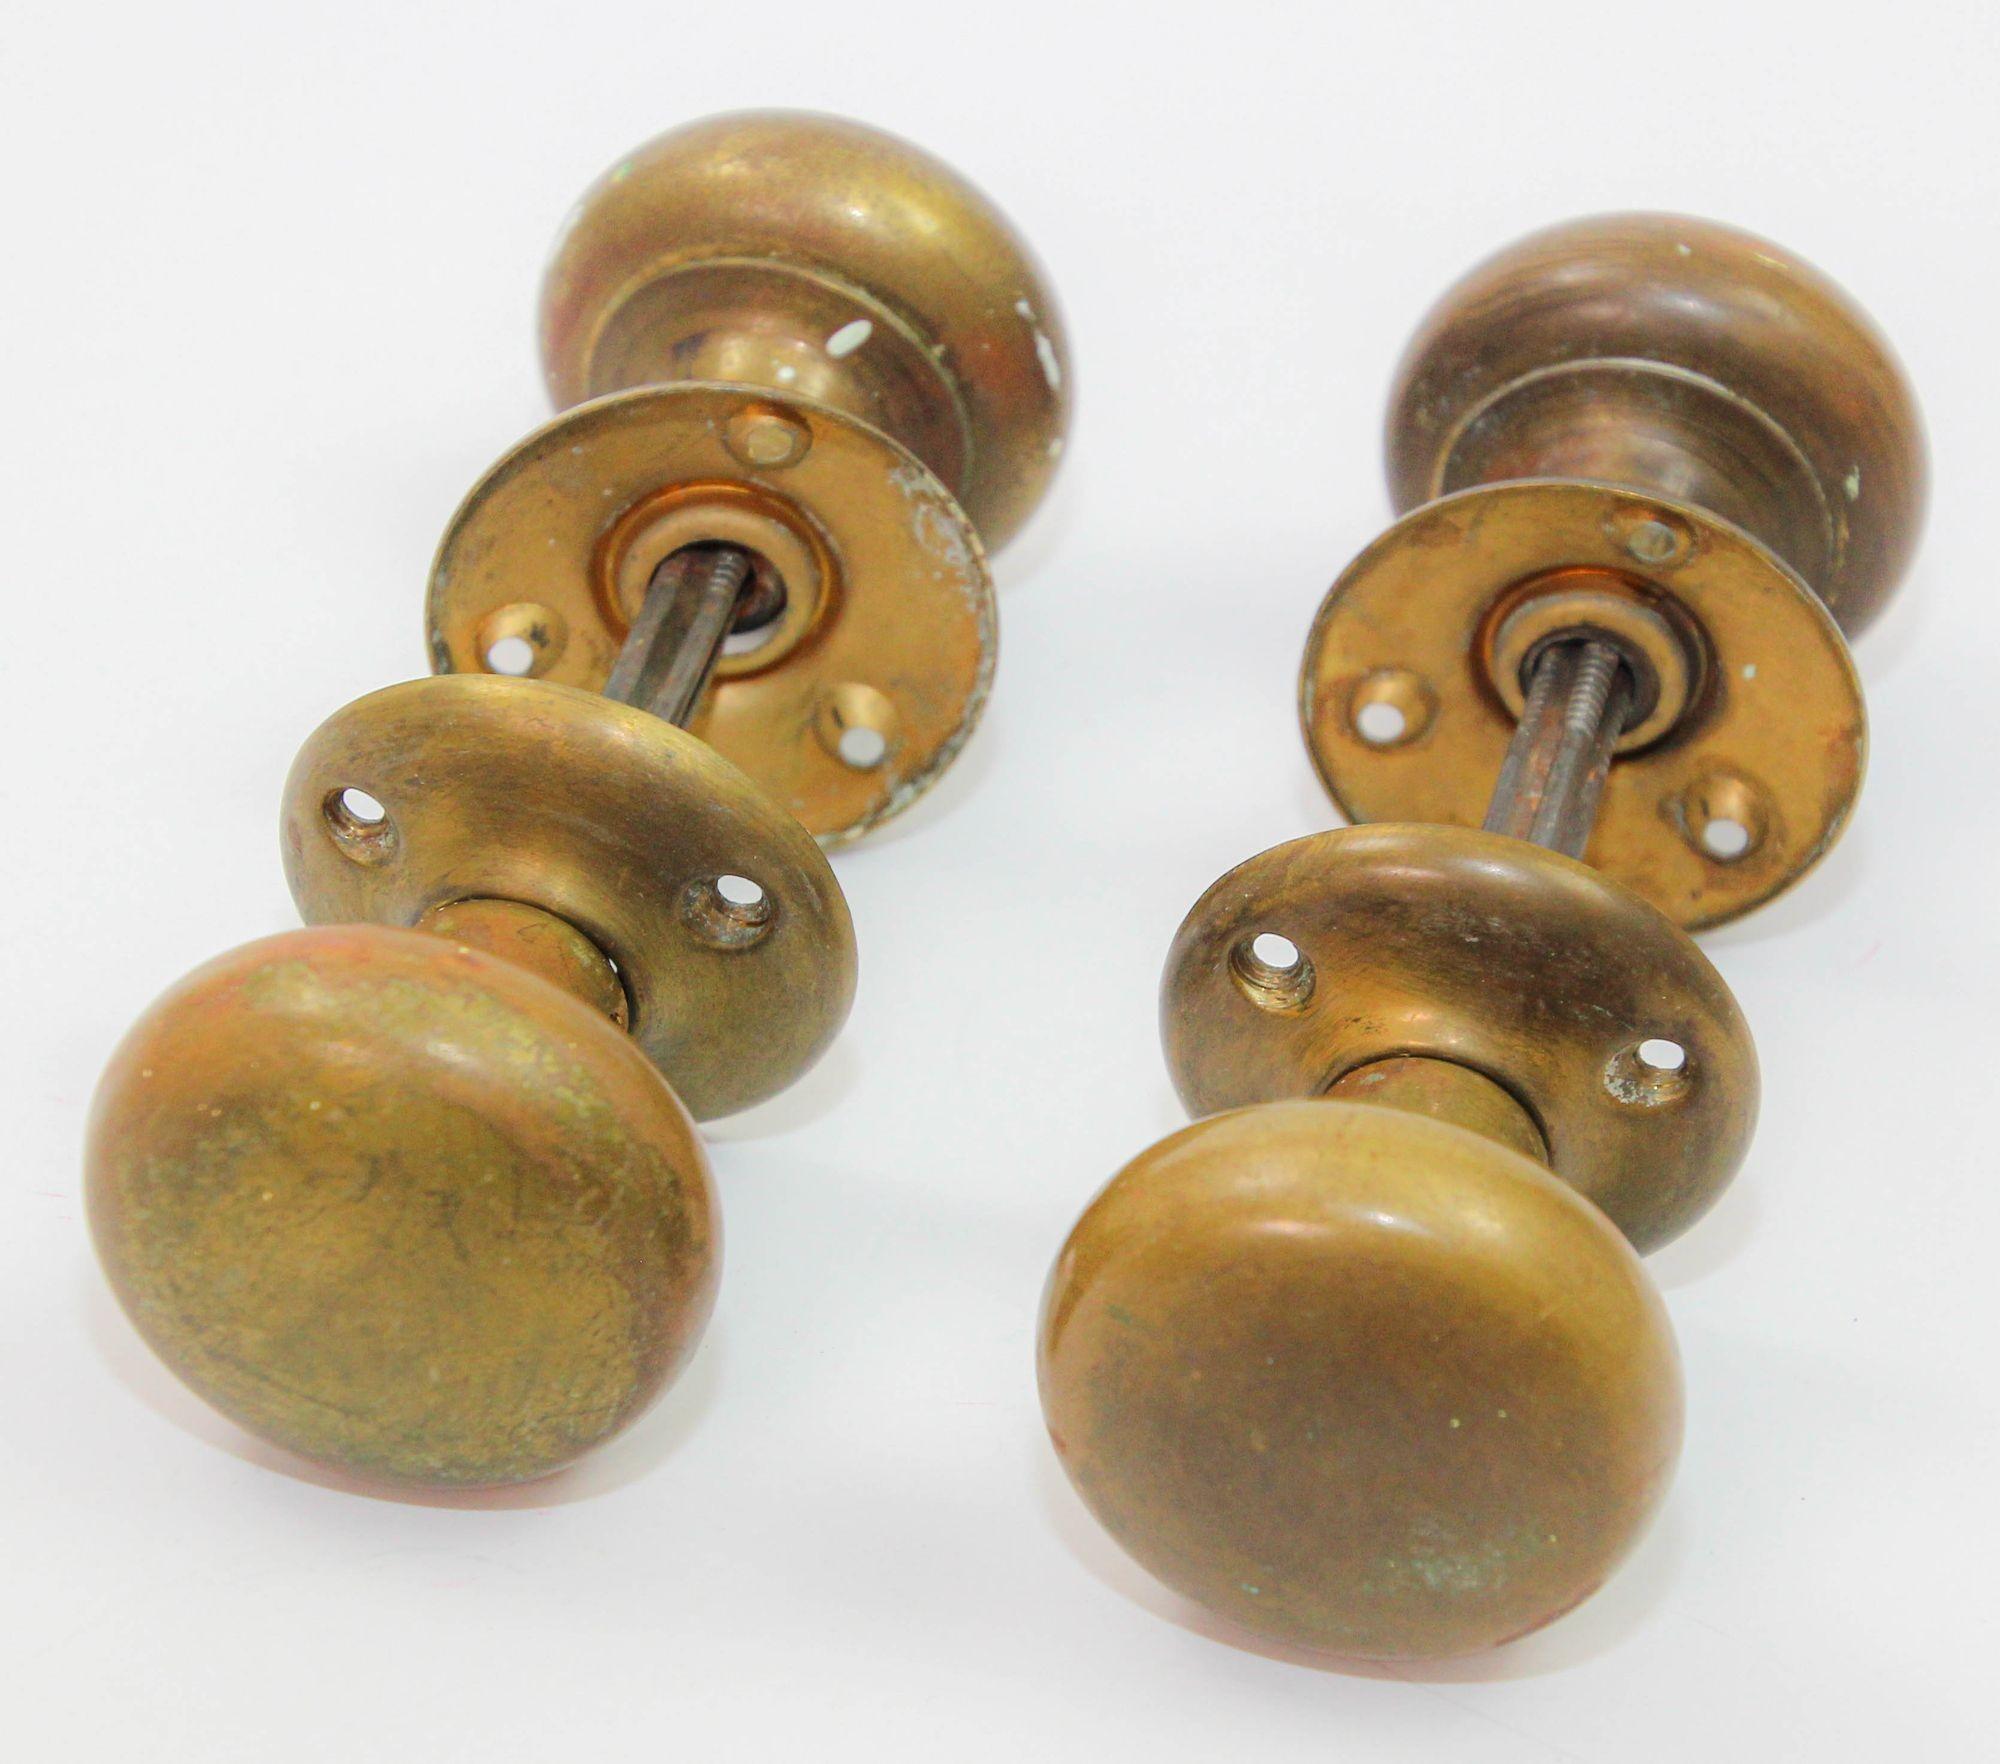 Antique patinated round brass passage door knobs sets on square spindle with rosettes.
These antique traditional door knobs will add timeless character to any door, rustic, farm house, horse property or french provincial or mountain cabin, Victorian